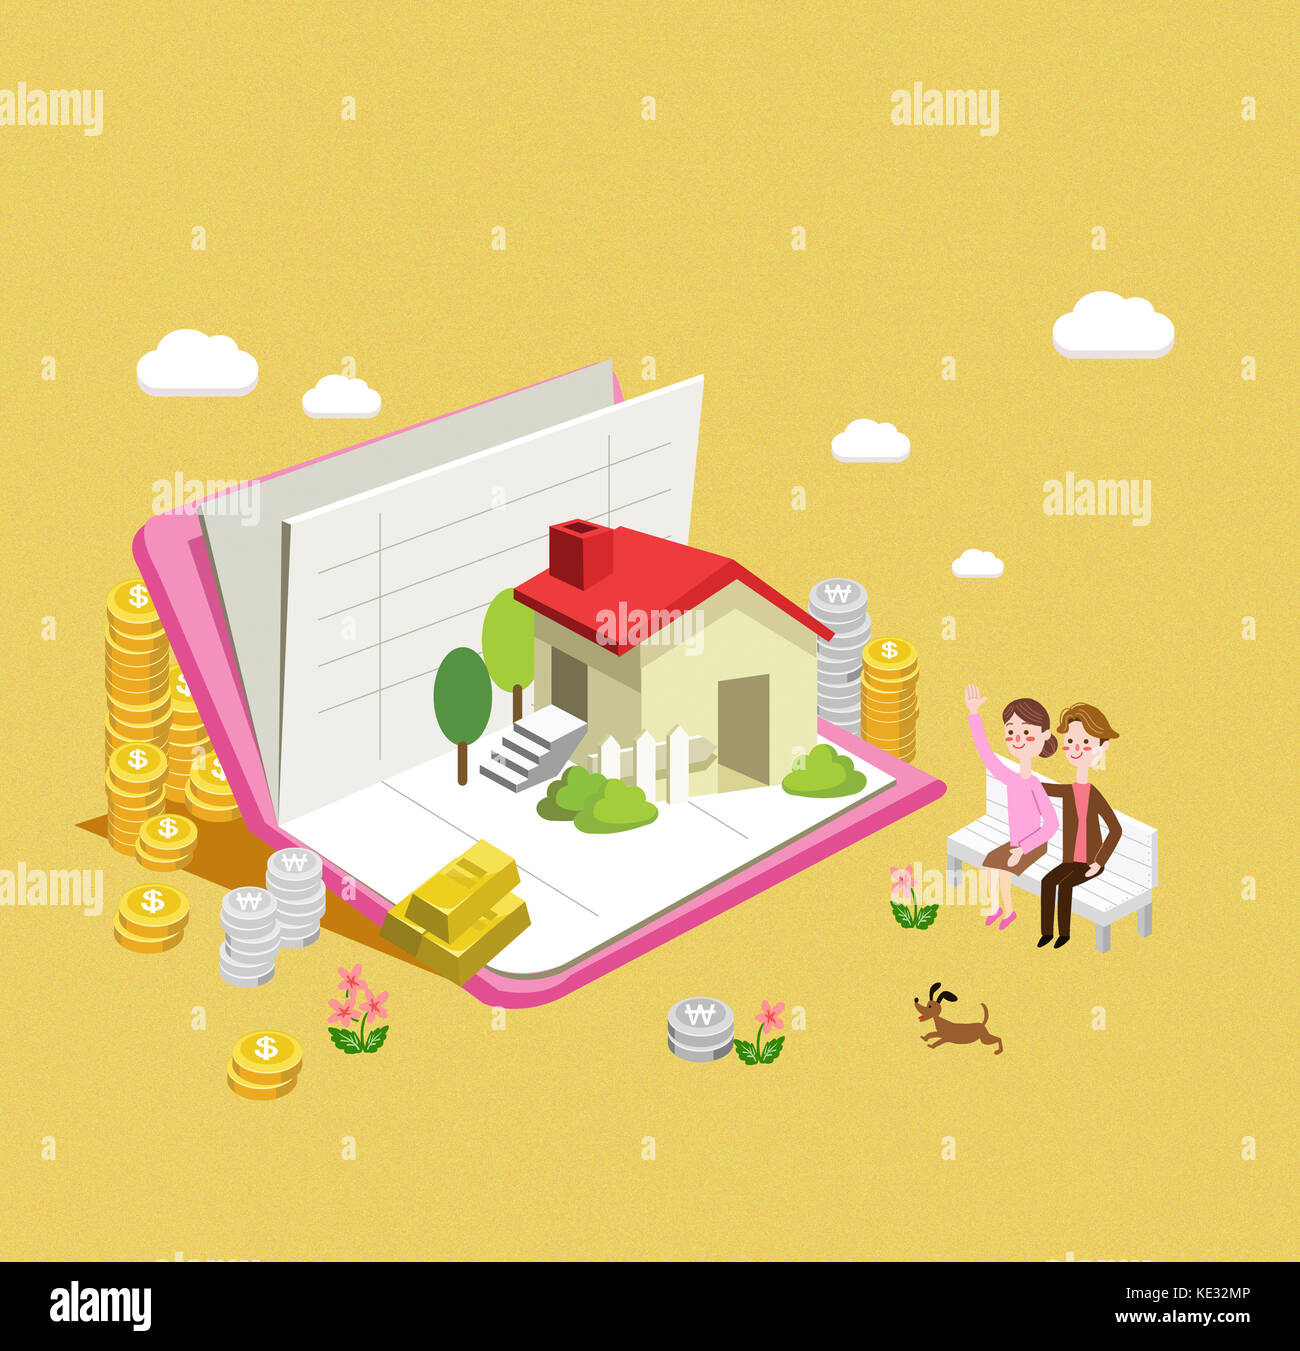 Smiling man and woman sitting on bench with a house and stacked money on a bankbook Stock Photo